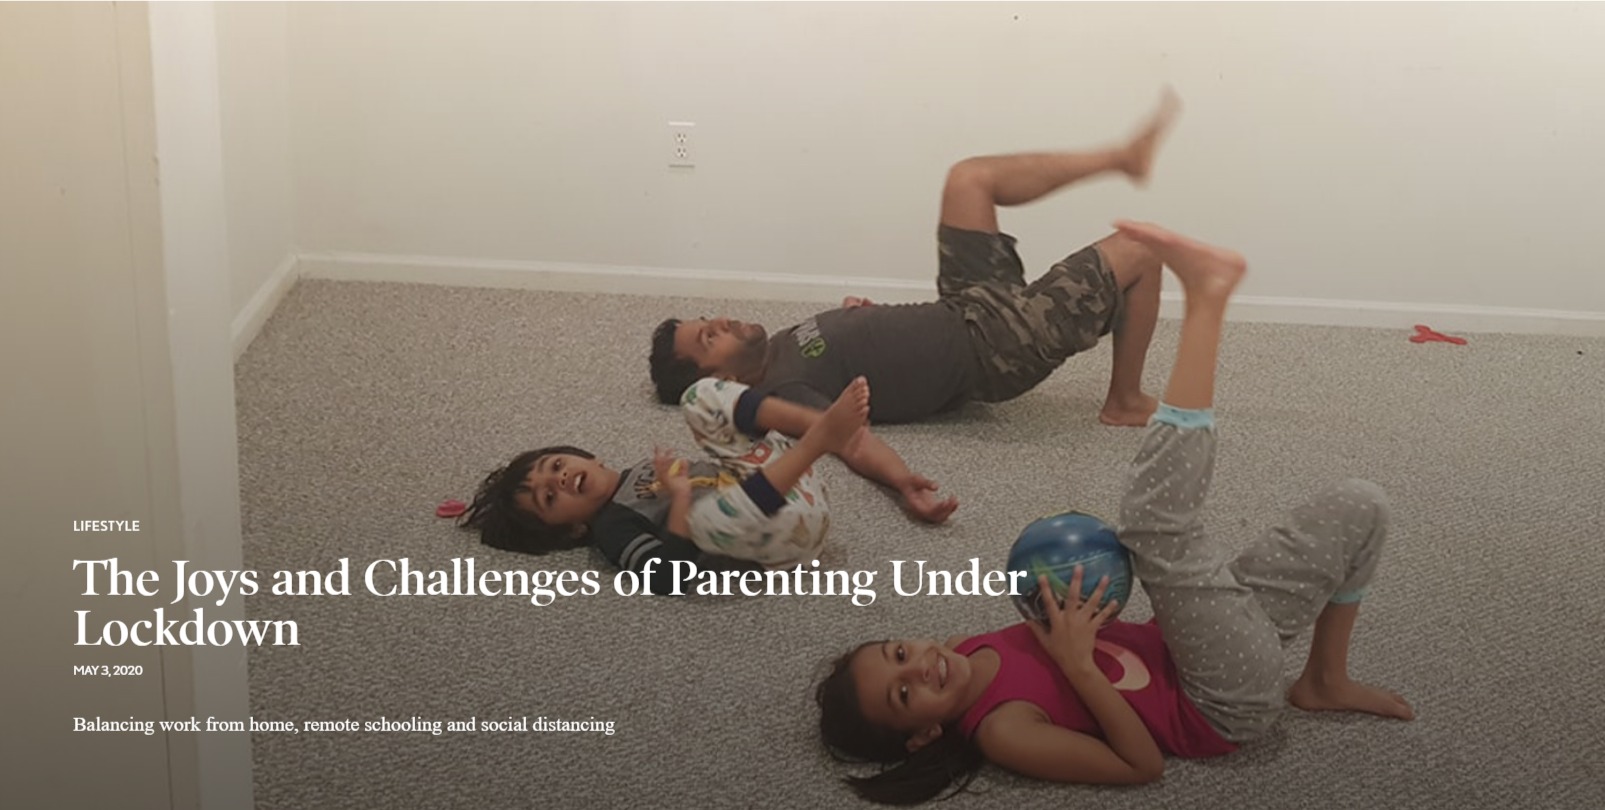 The Joys and Challenges of Parenting Under Lockdown